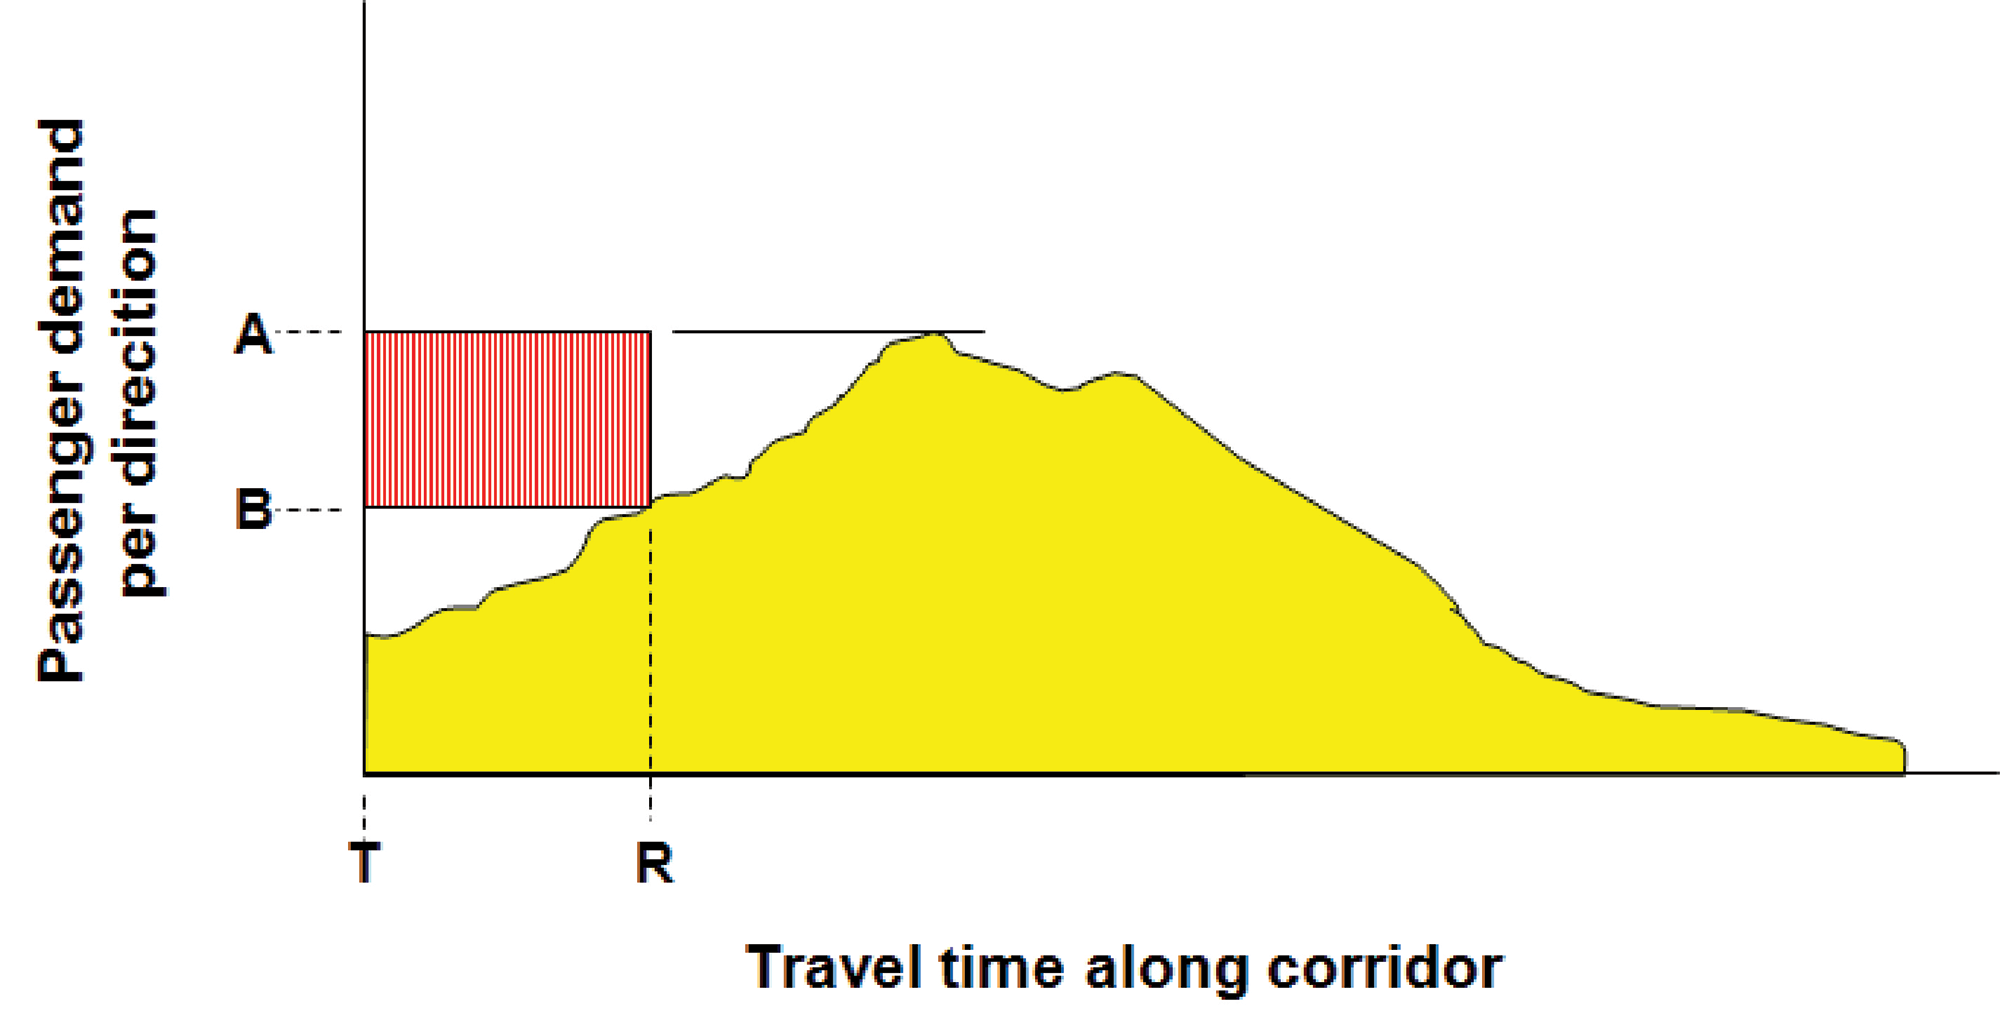 Fig. 6.69 Adding a second local service that covers only the highest demand segment of a corridor can reduce operating costs while limiting additional delay for customers. Image